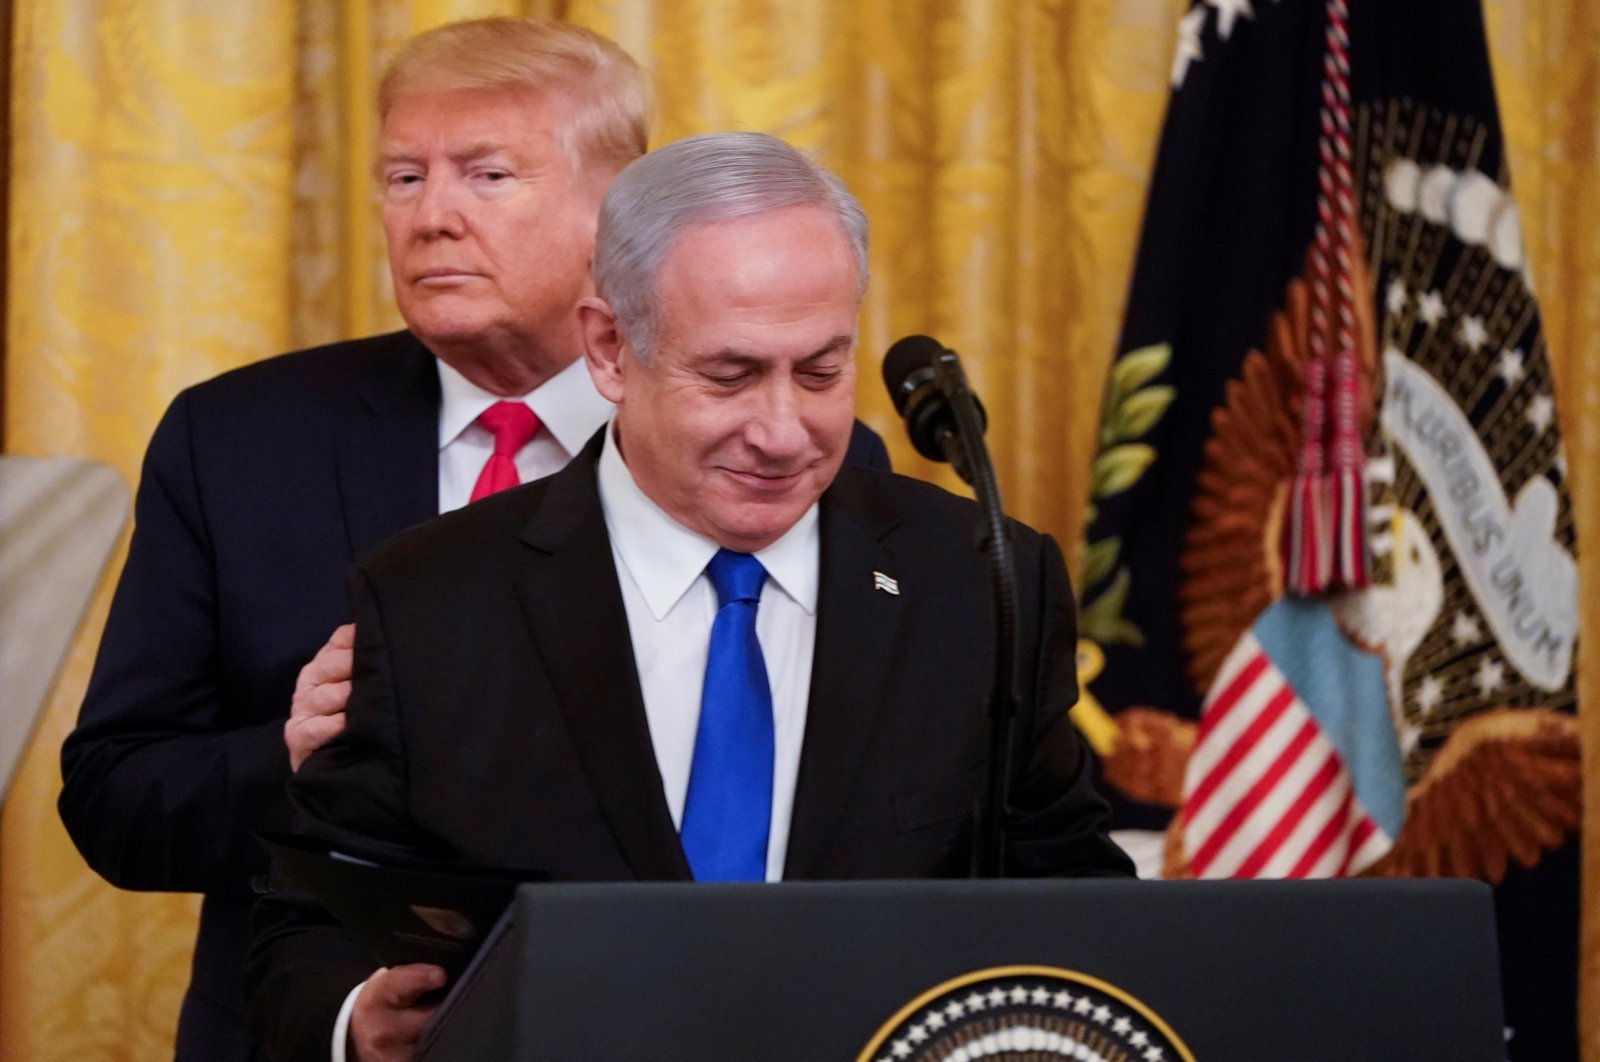 U.S. President Donald Trump puts his hands on Israel's Prime Minister Benjamin Netanyahu's shoulders as they deliver joint remarks on a Middle East peace plan proposal in the East Room of the White House in Washington, U.S., Jan. 28, 2020. (Reuters Photo)